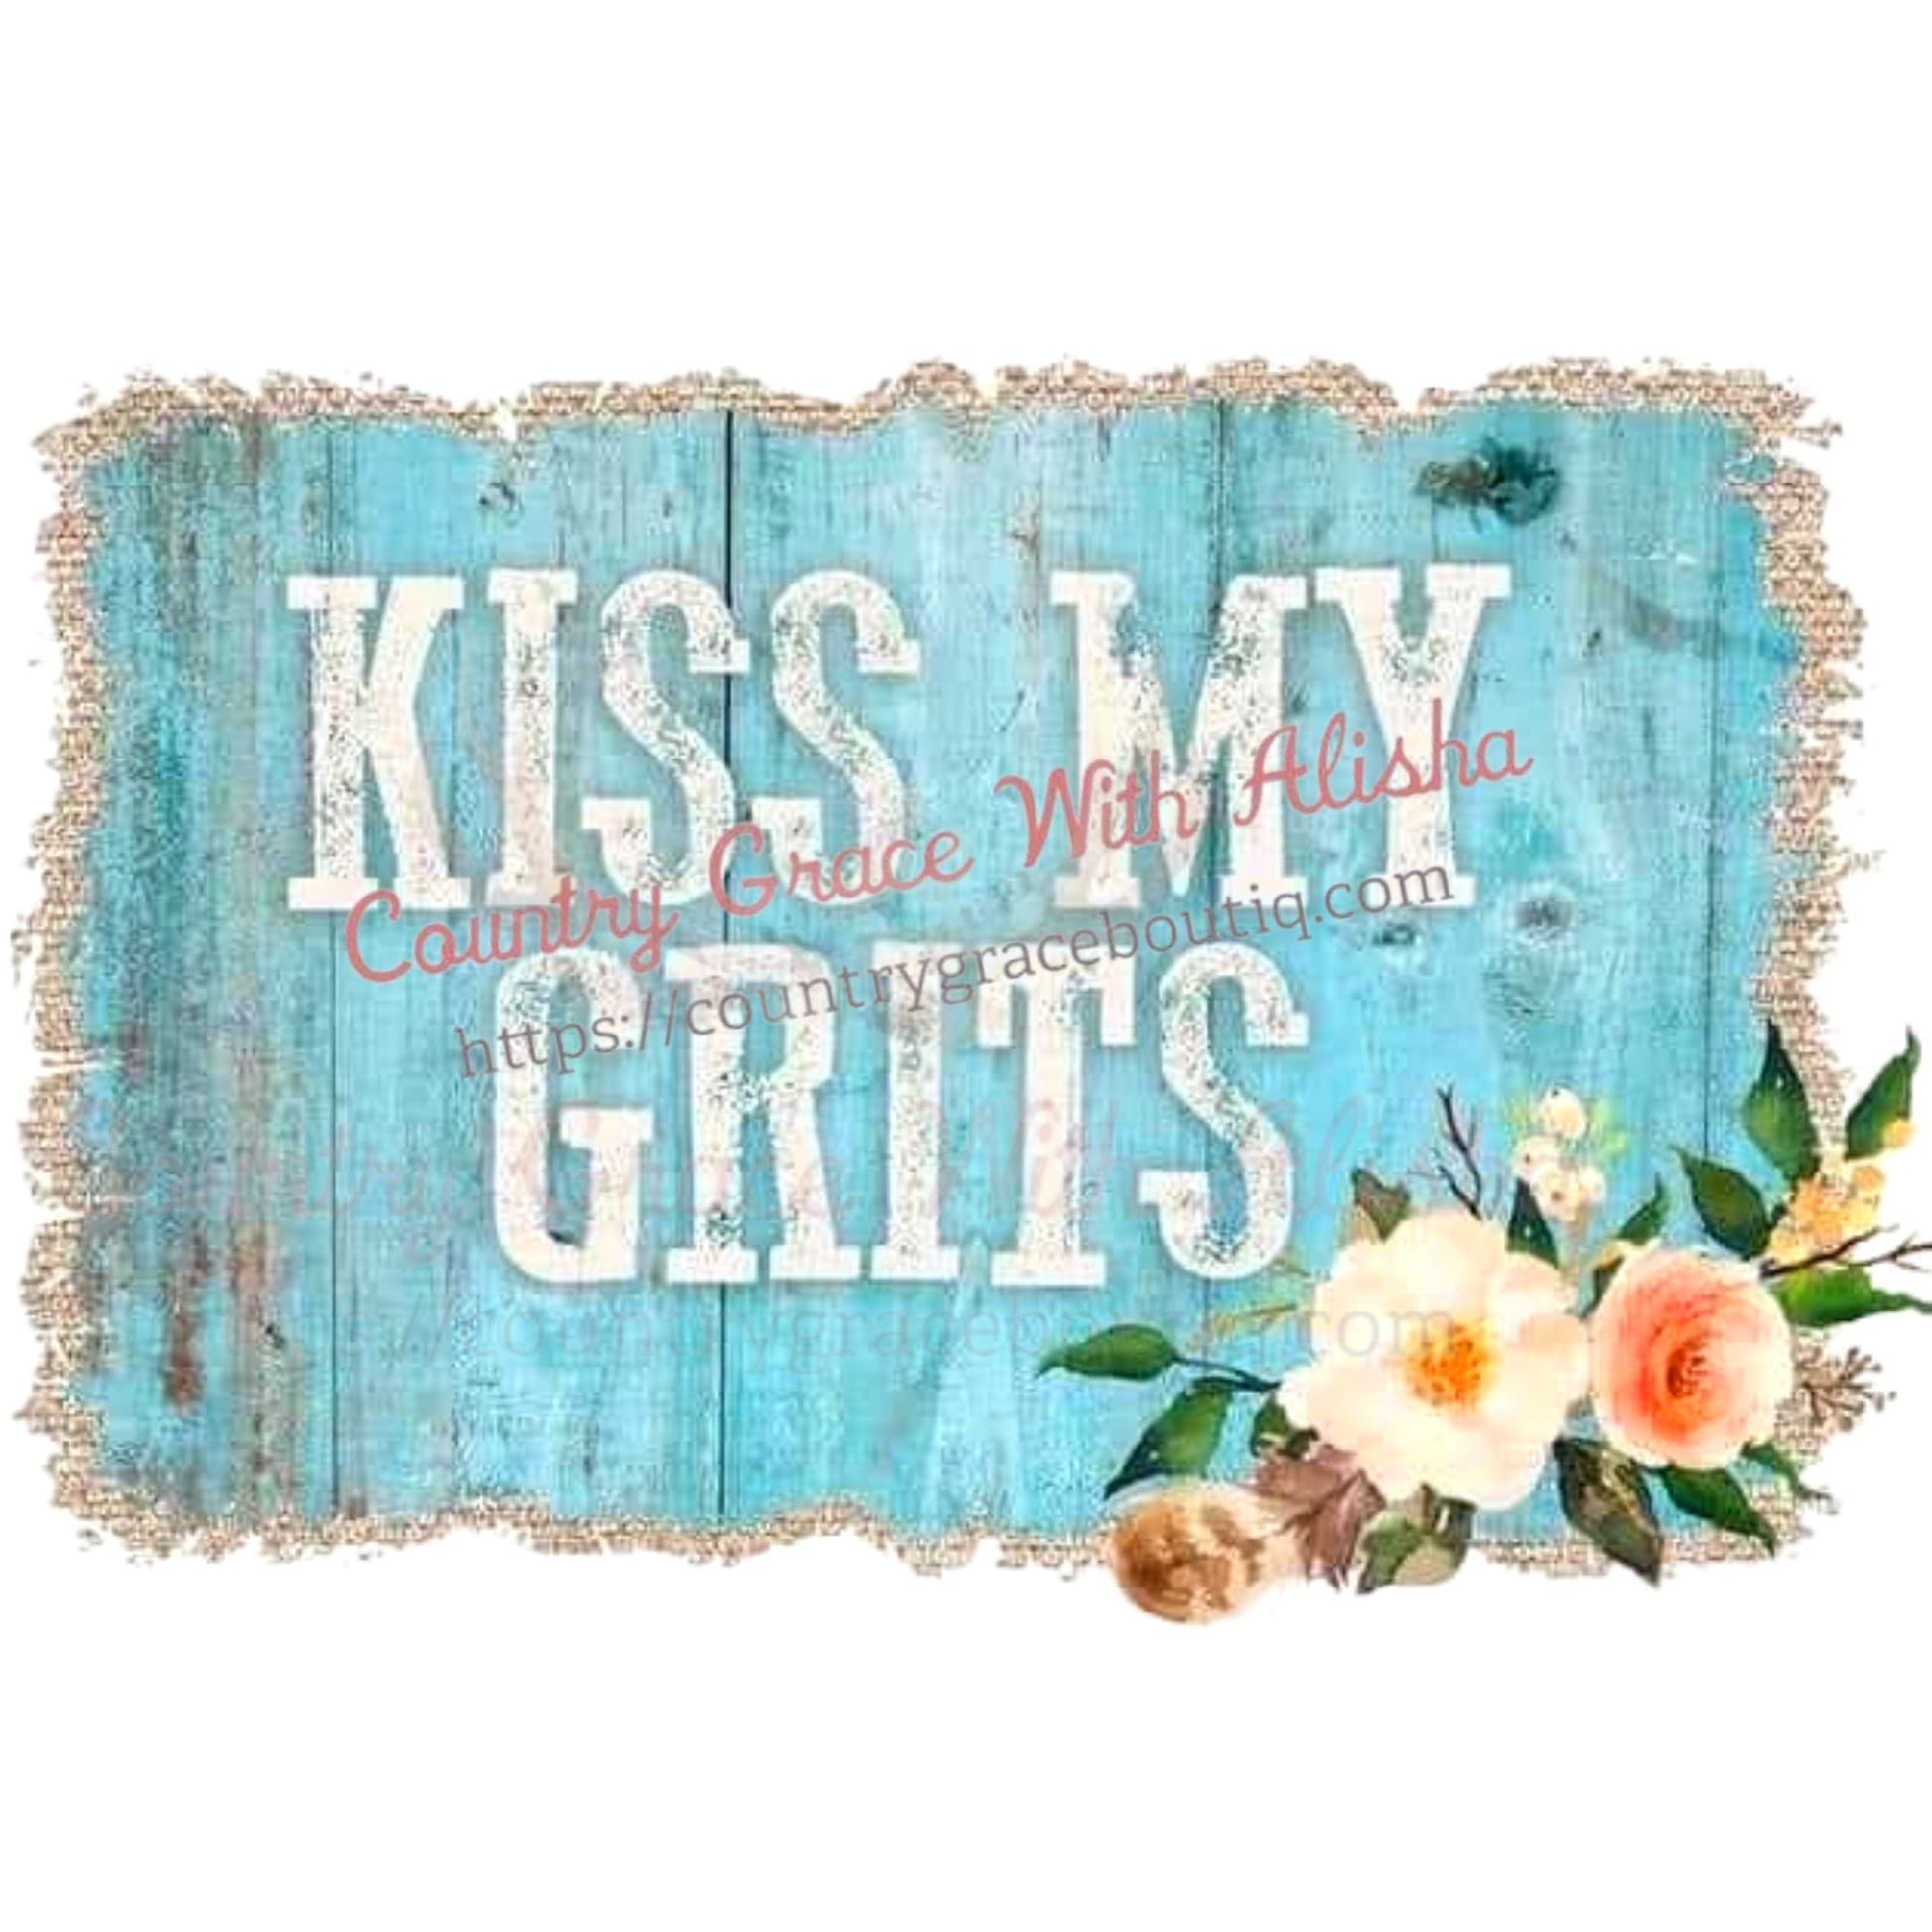 Kiss My Grits Sublimation Transfer - Sub $1.50 Country Grace